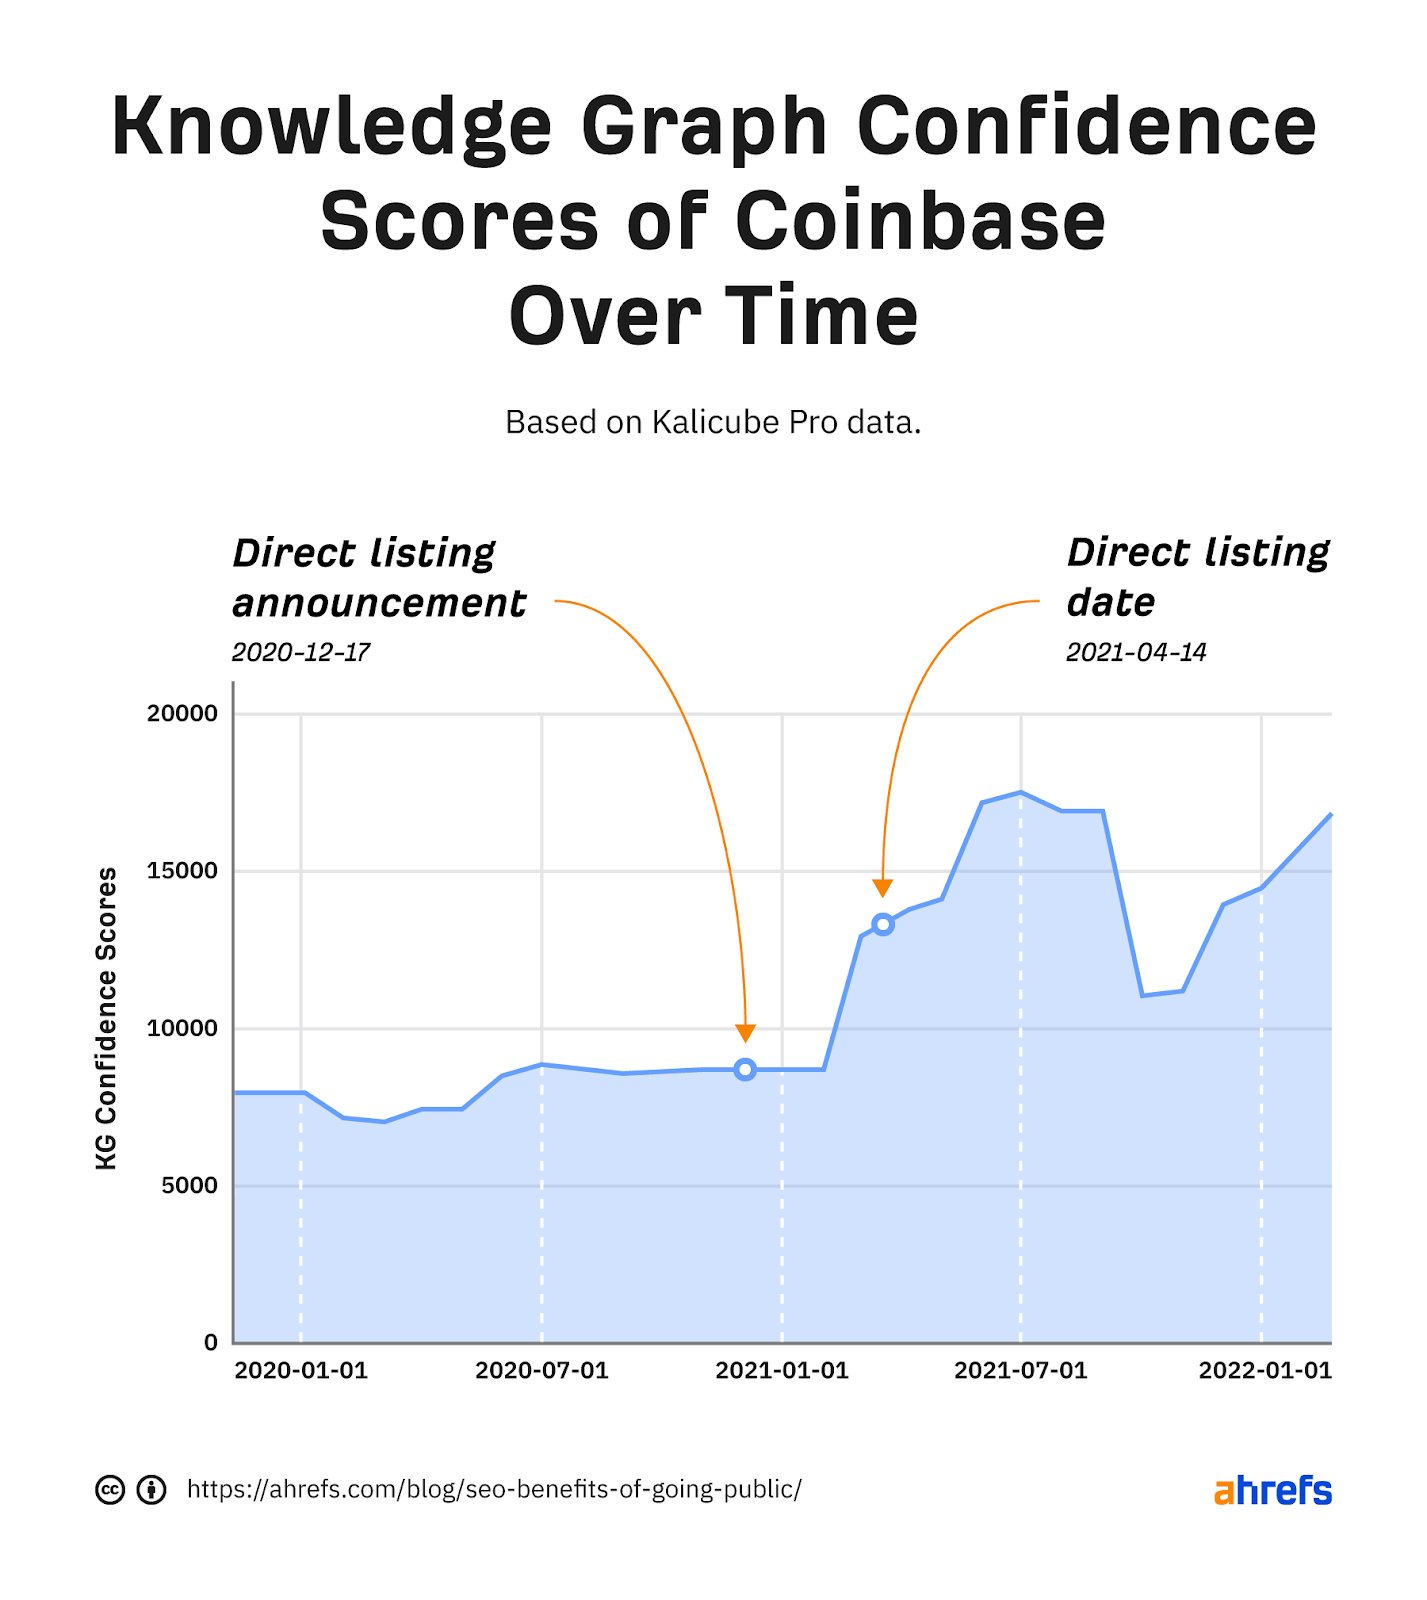 Area graph showing KG confidence score increases after direct listing announcement 